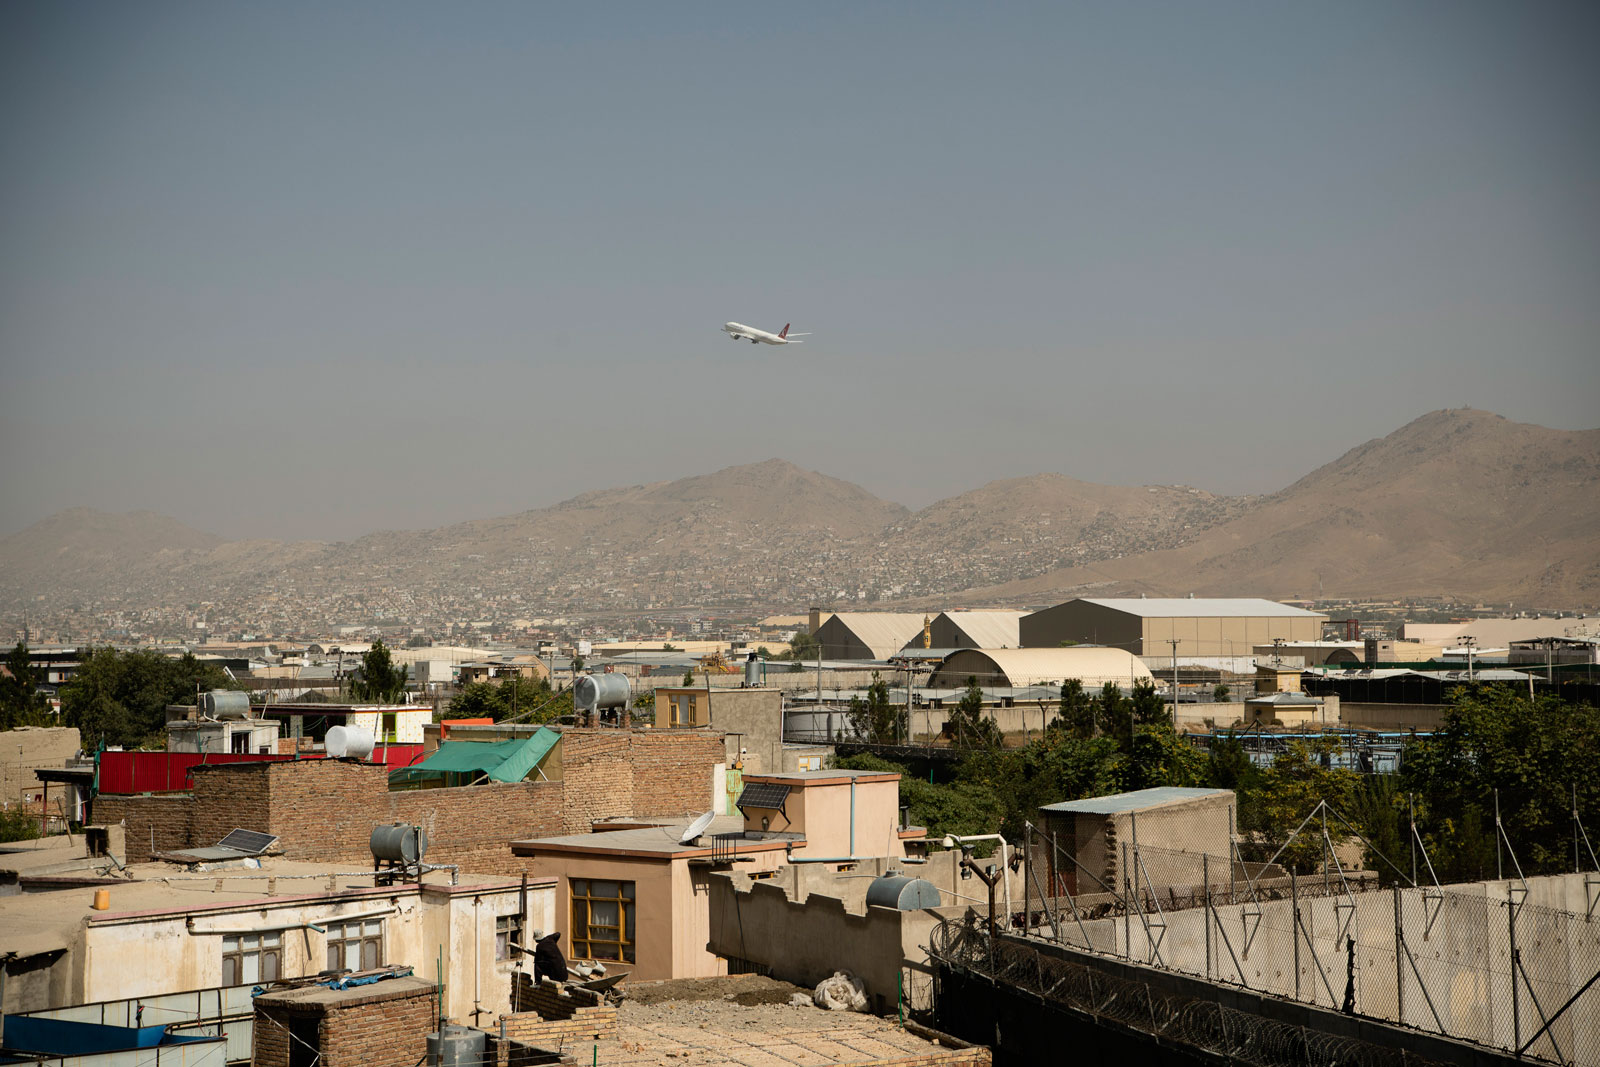 A plane leaves the Hamid Karzai International Airport in Kabul on August 15.